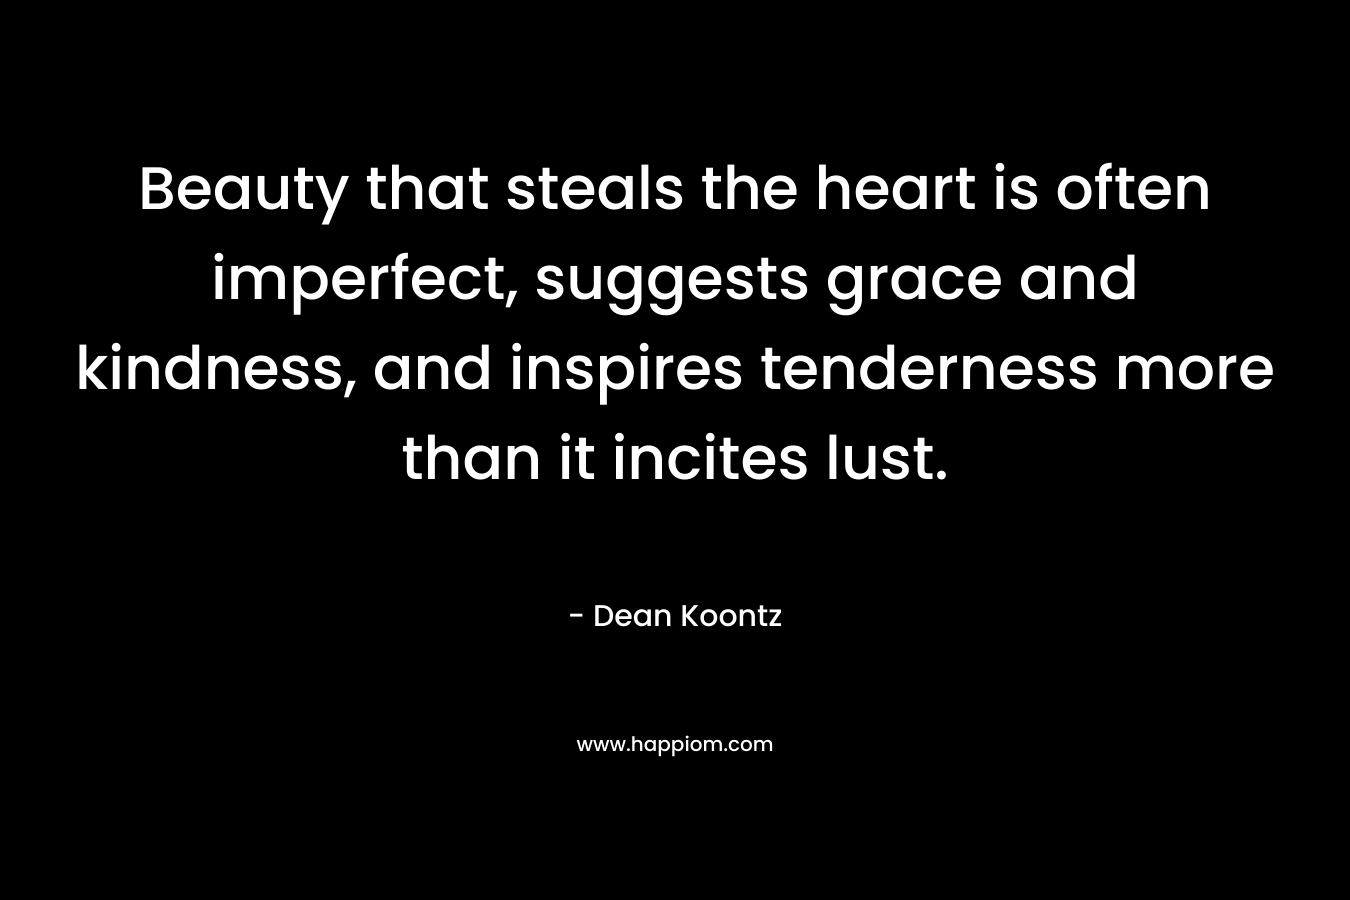 Beauty that steals the heart is often imperfect, suggests grace and kindness, and inspires tenderness more than it incites lust. – Dean Koontz